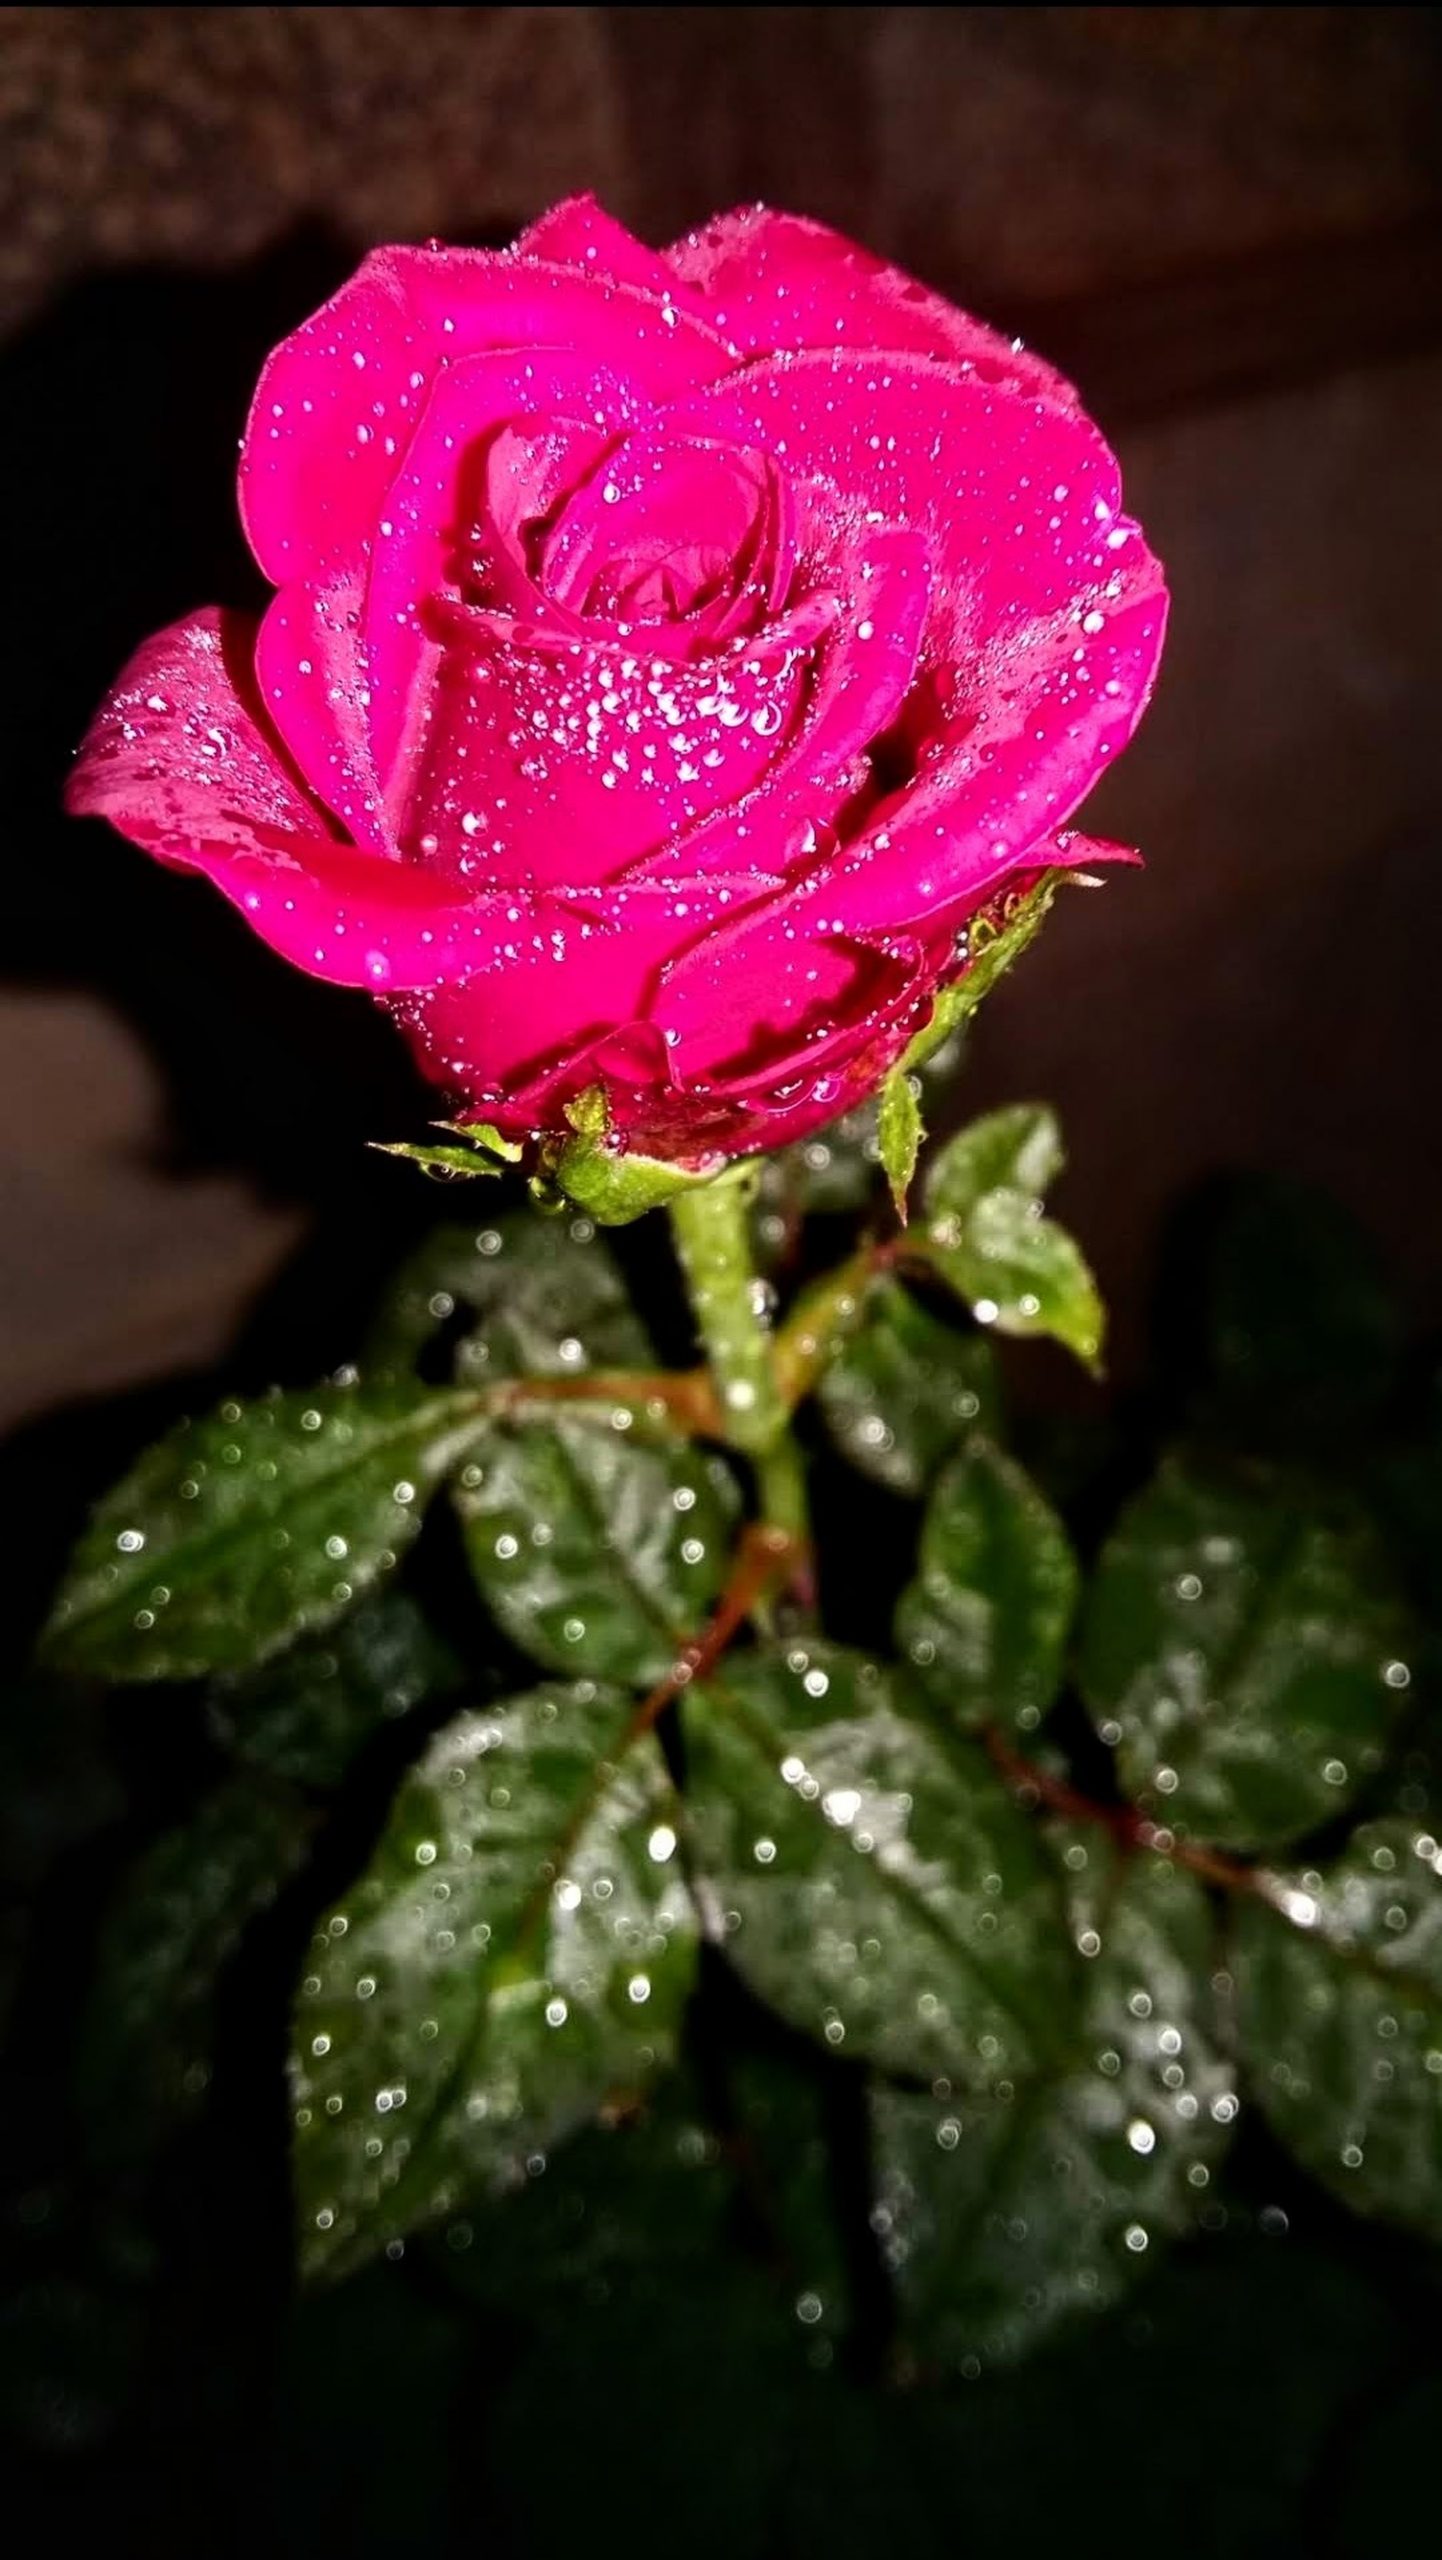 Water droplet on rose